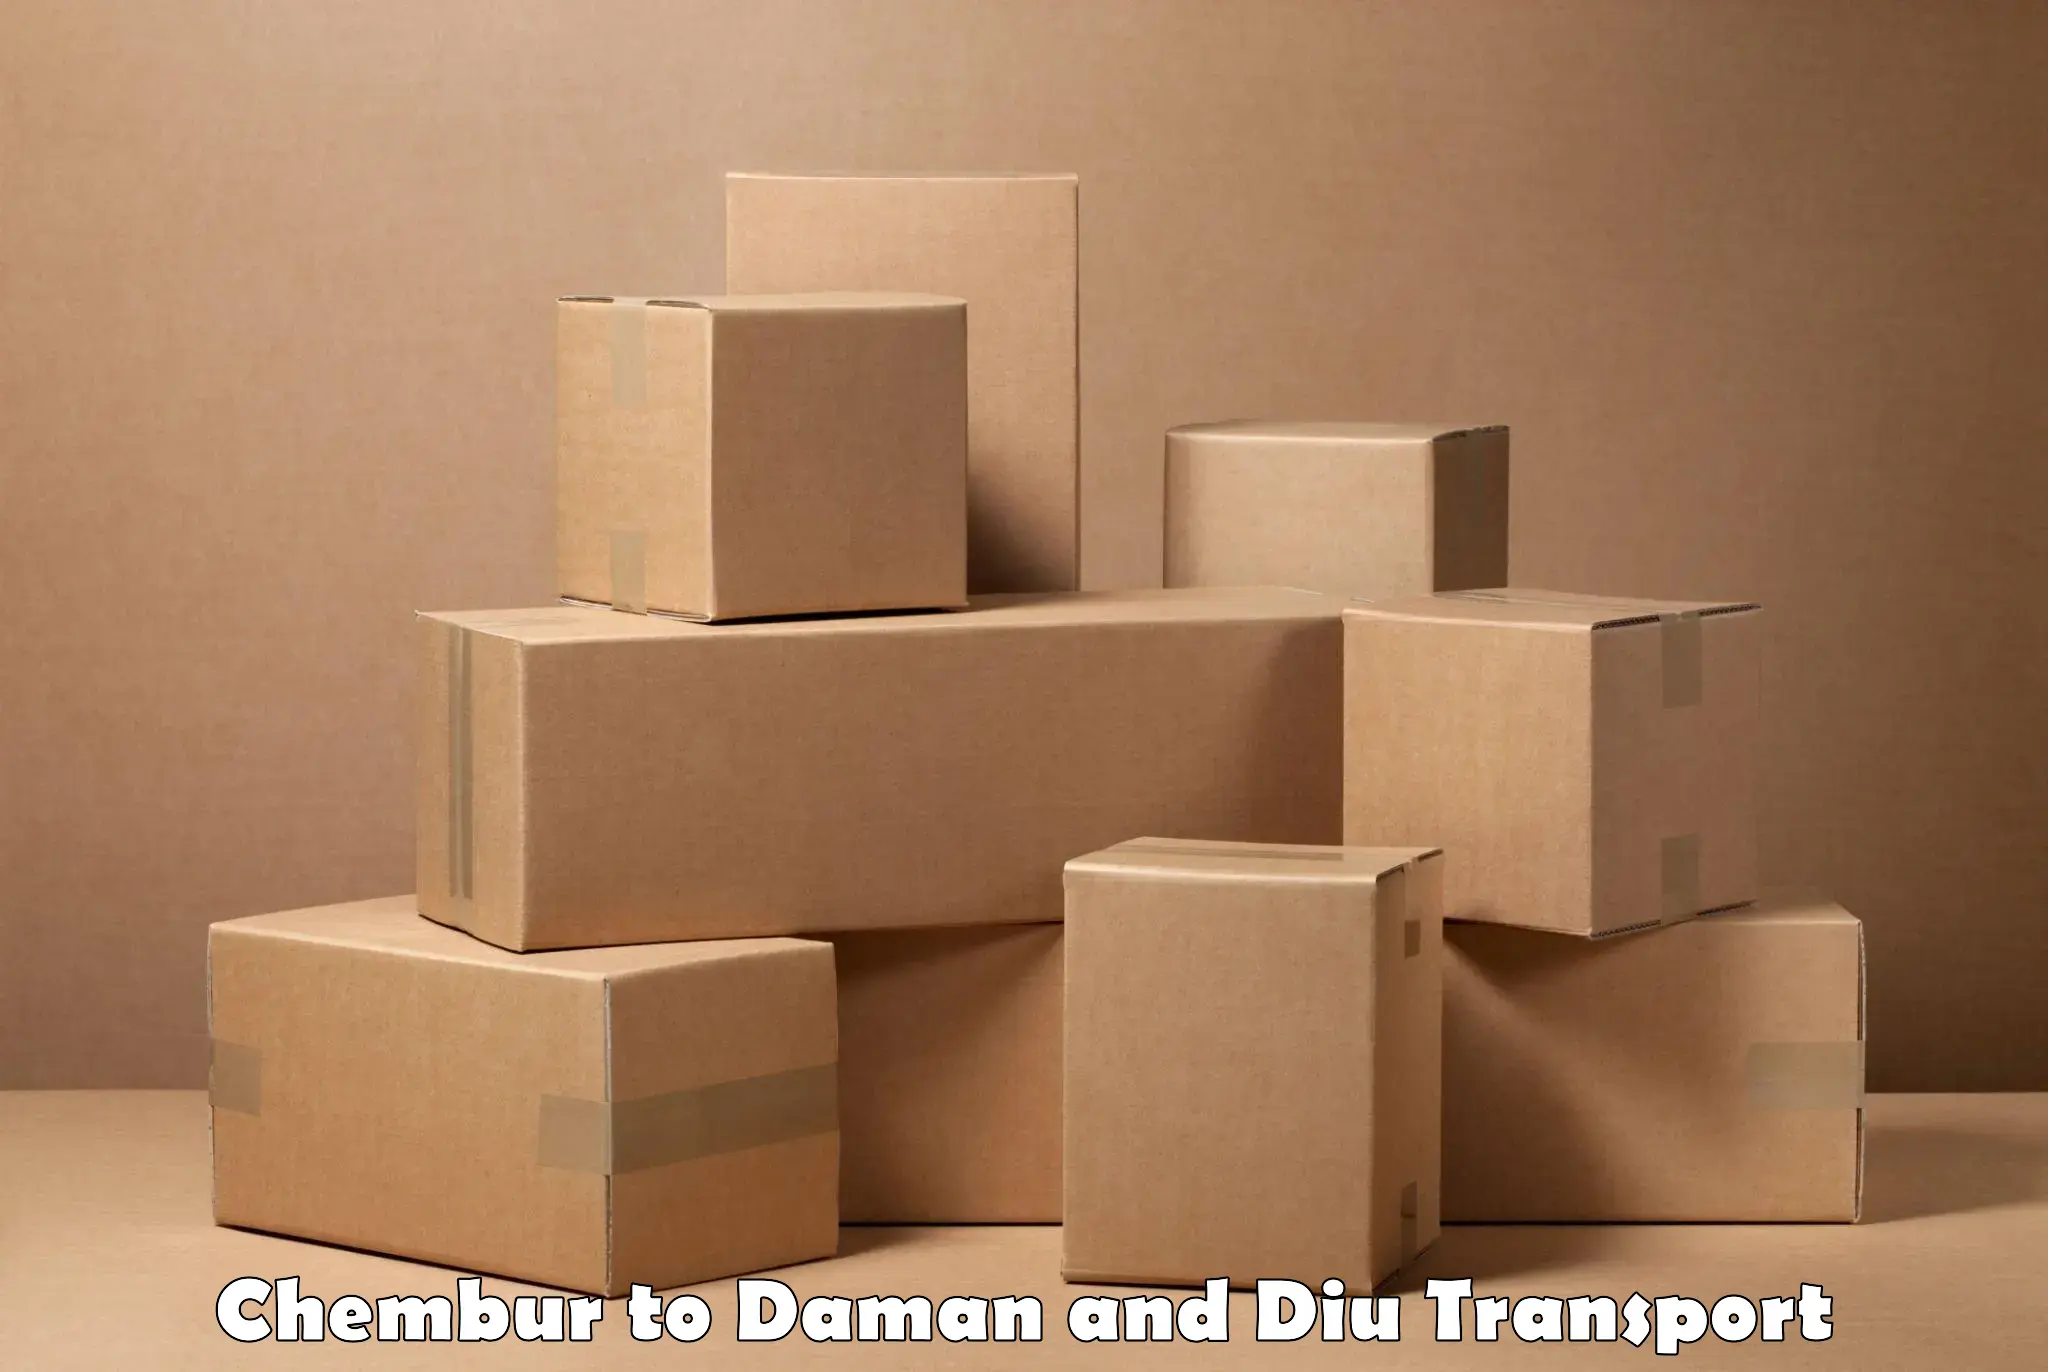 Daily parcel service transport Chembur to Daman and Diu